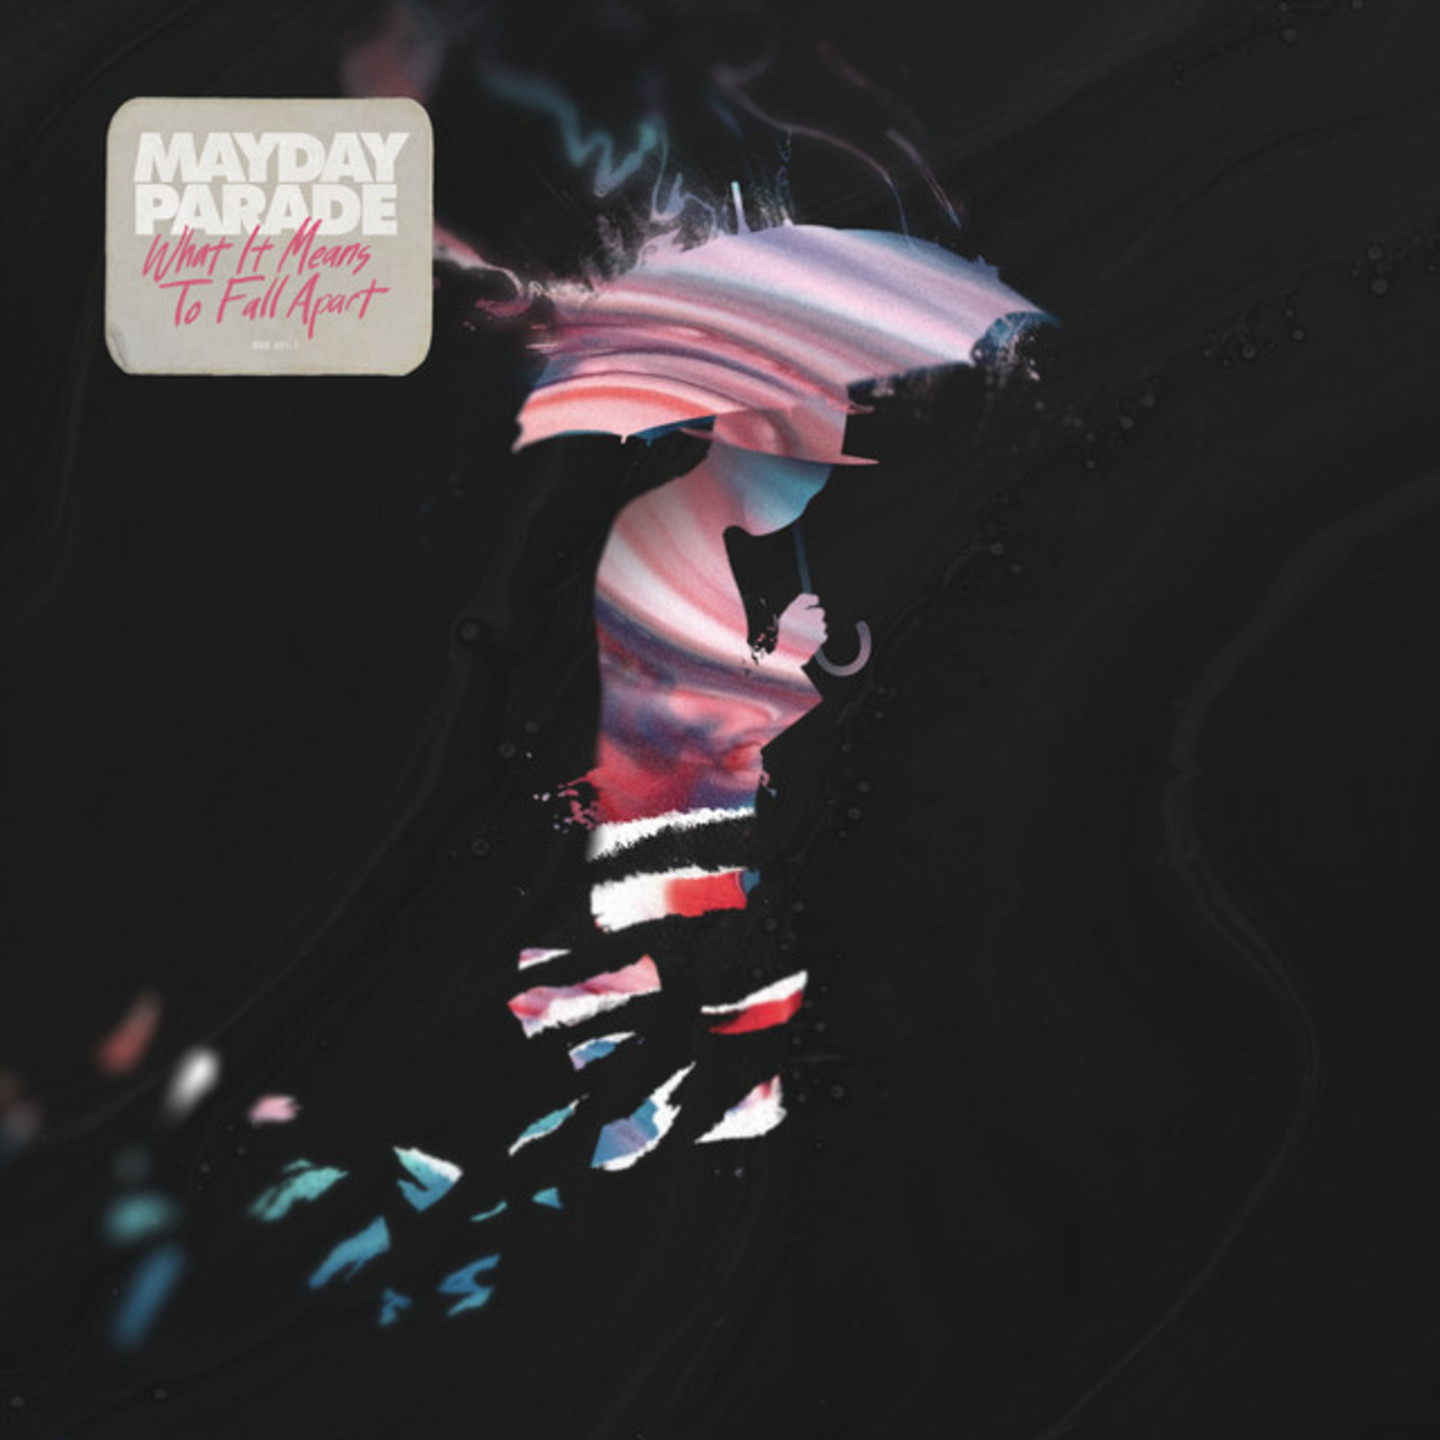 MAYDAY PARADE - What It Means To Fall Apart LP (Light Pink Vinyl)